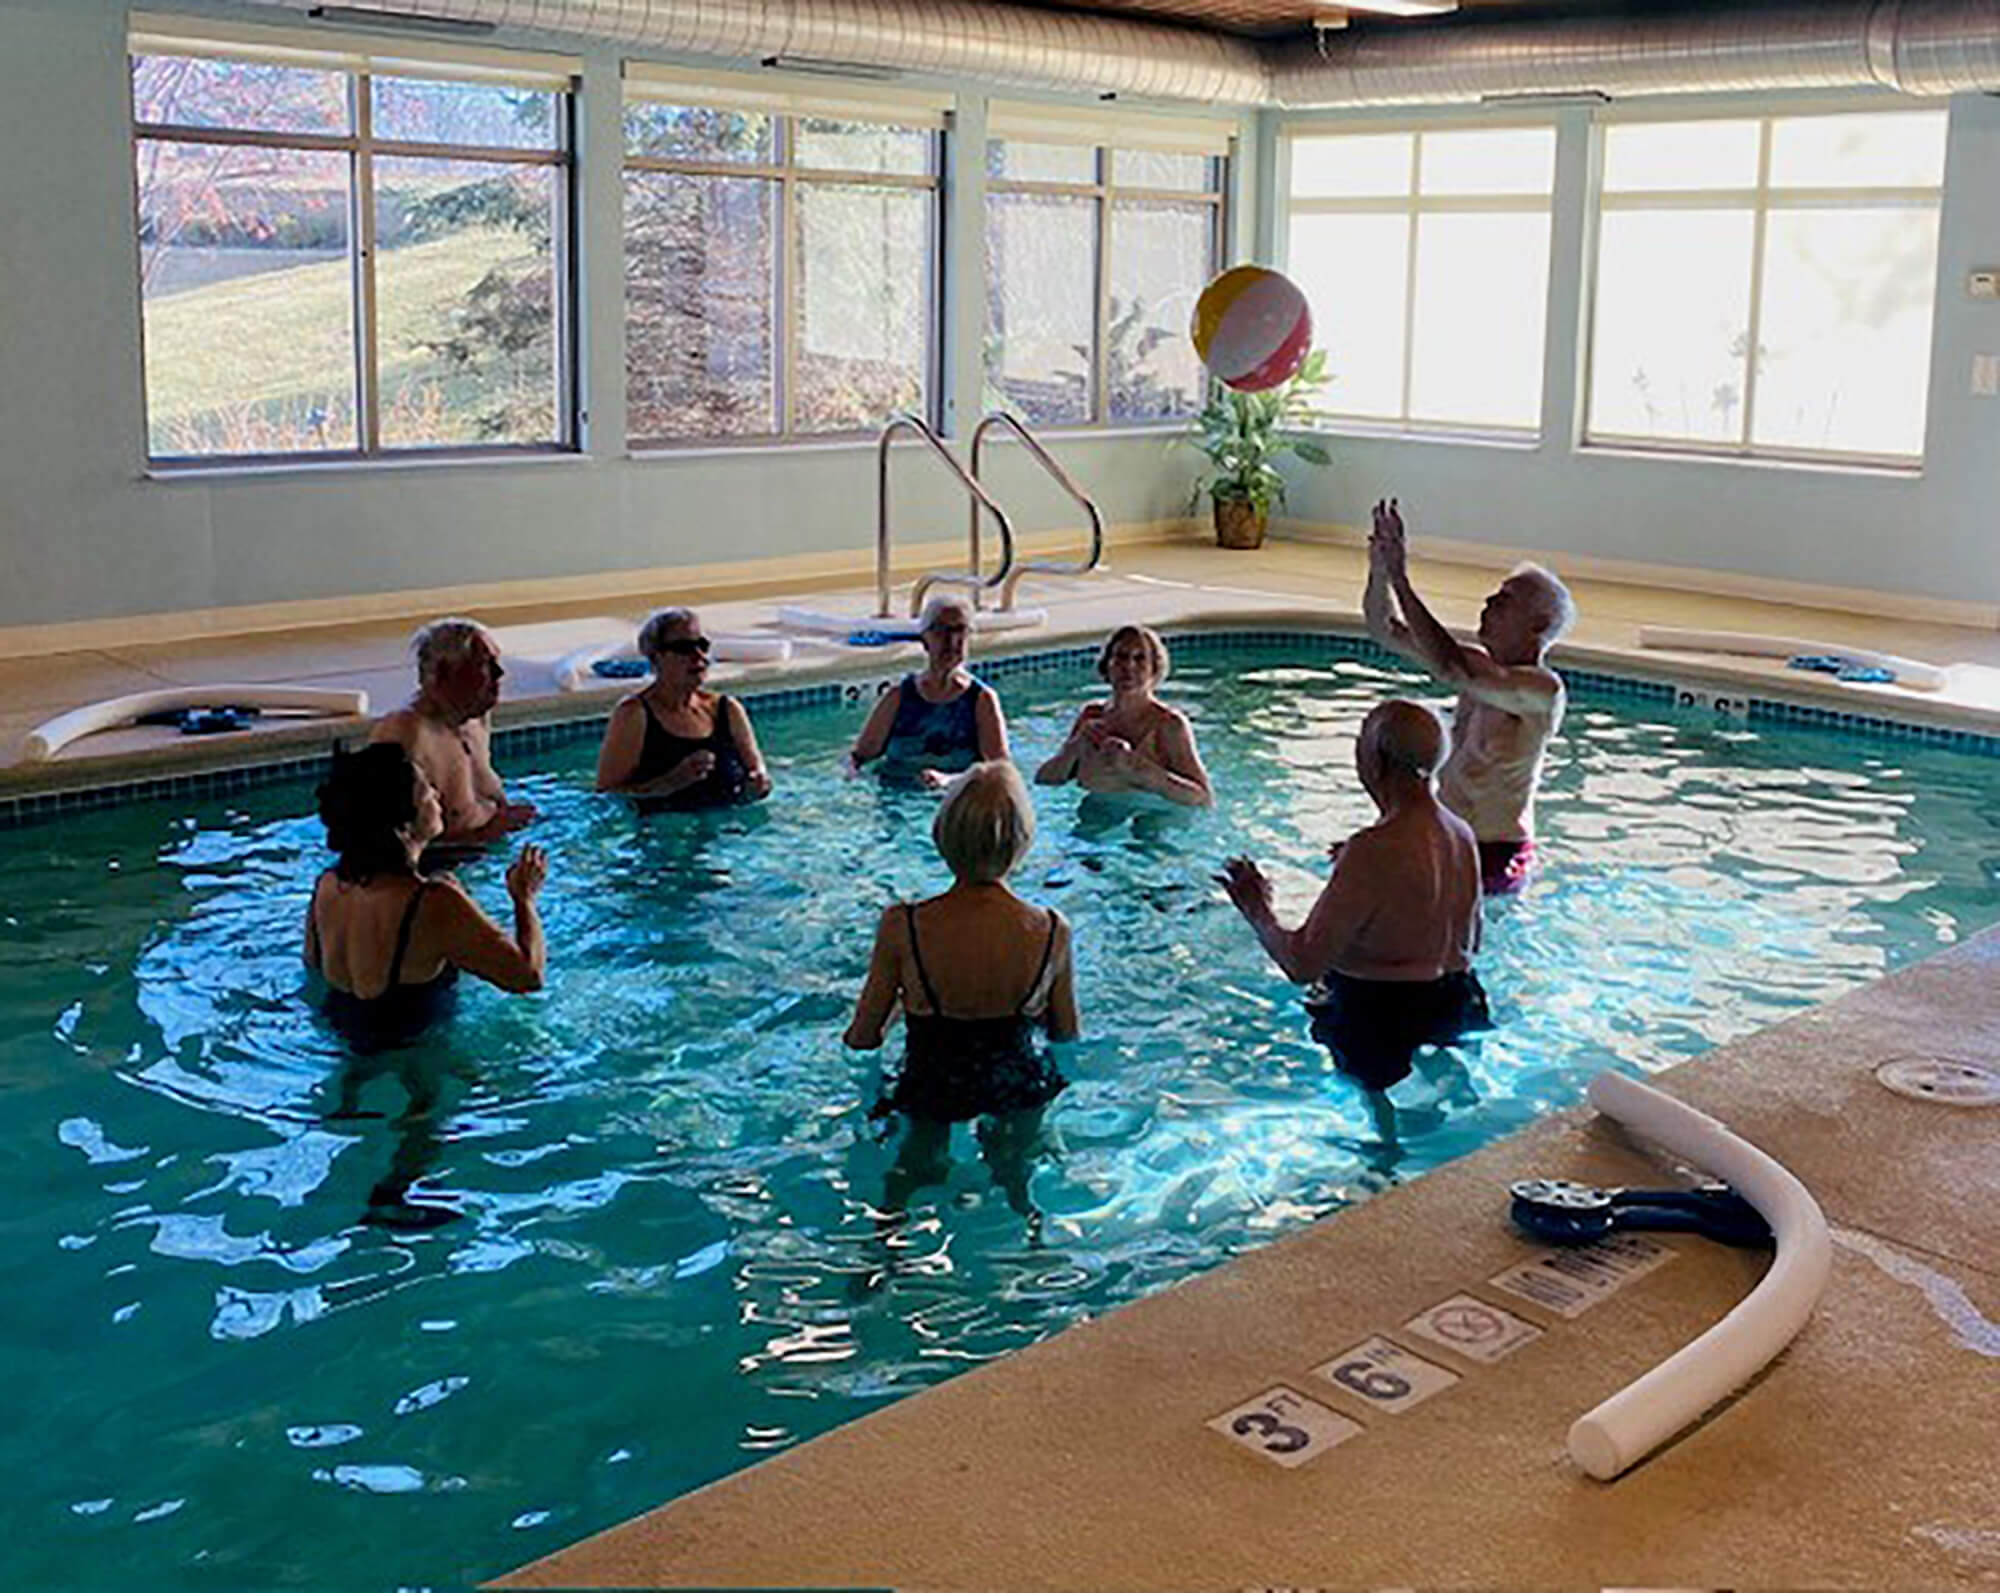 Seniors participate in an aquatic fitness class in Edina, enhancing their health in a sunlit pool area with exercise equipment nearby.